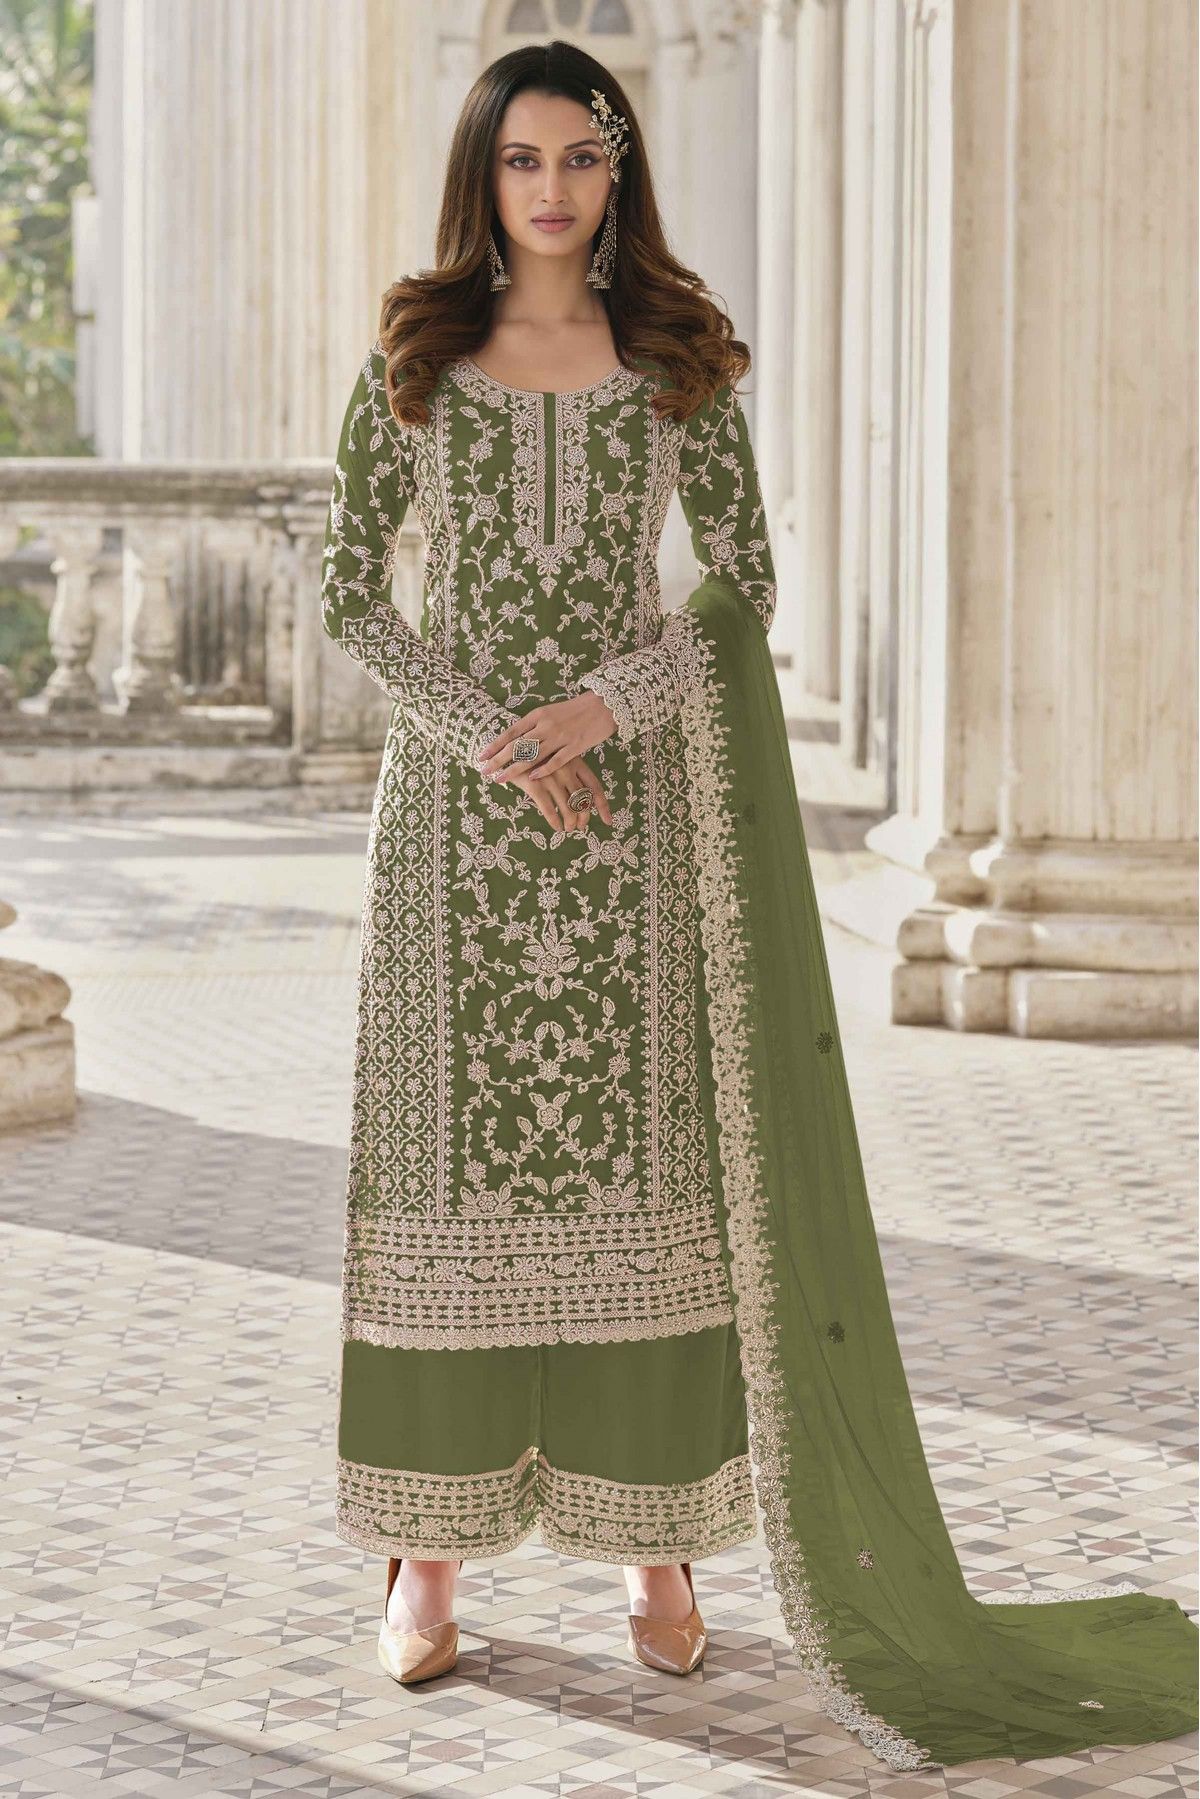 Indian Palazzo Suits Palazzo Pants Suit For Wedding Palazzo Pant Suits  Palazzo Dress #salwarkamee | Patiala suit designs, Casual indian fashion,  Punjabi models